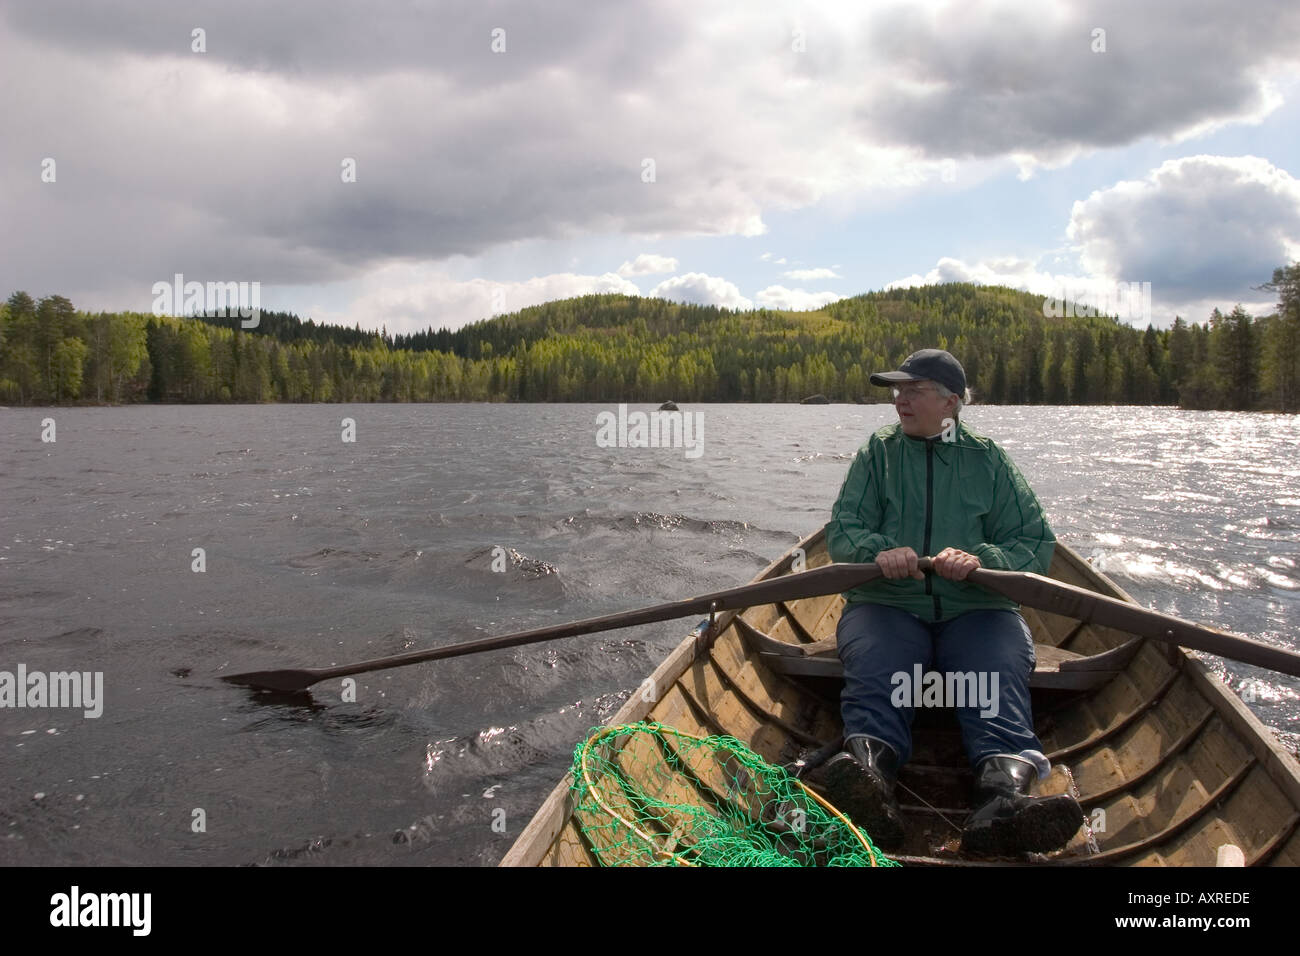 An elderly woman rowing a wooden rowboat  / skiff / dinghy at a lake , Finland Stock Photo